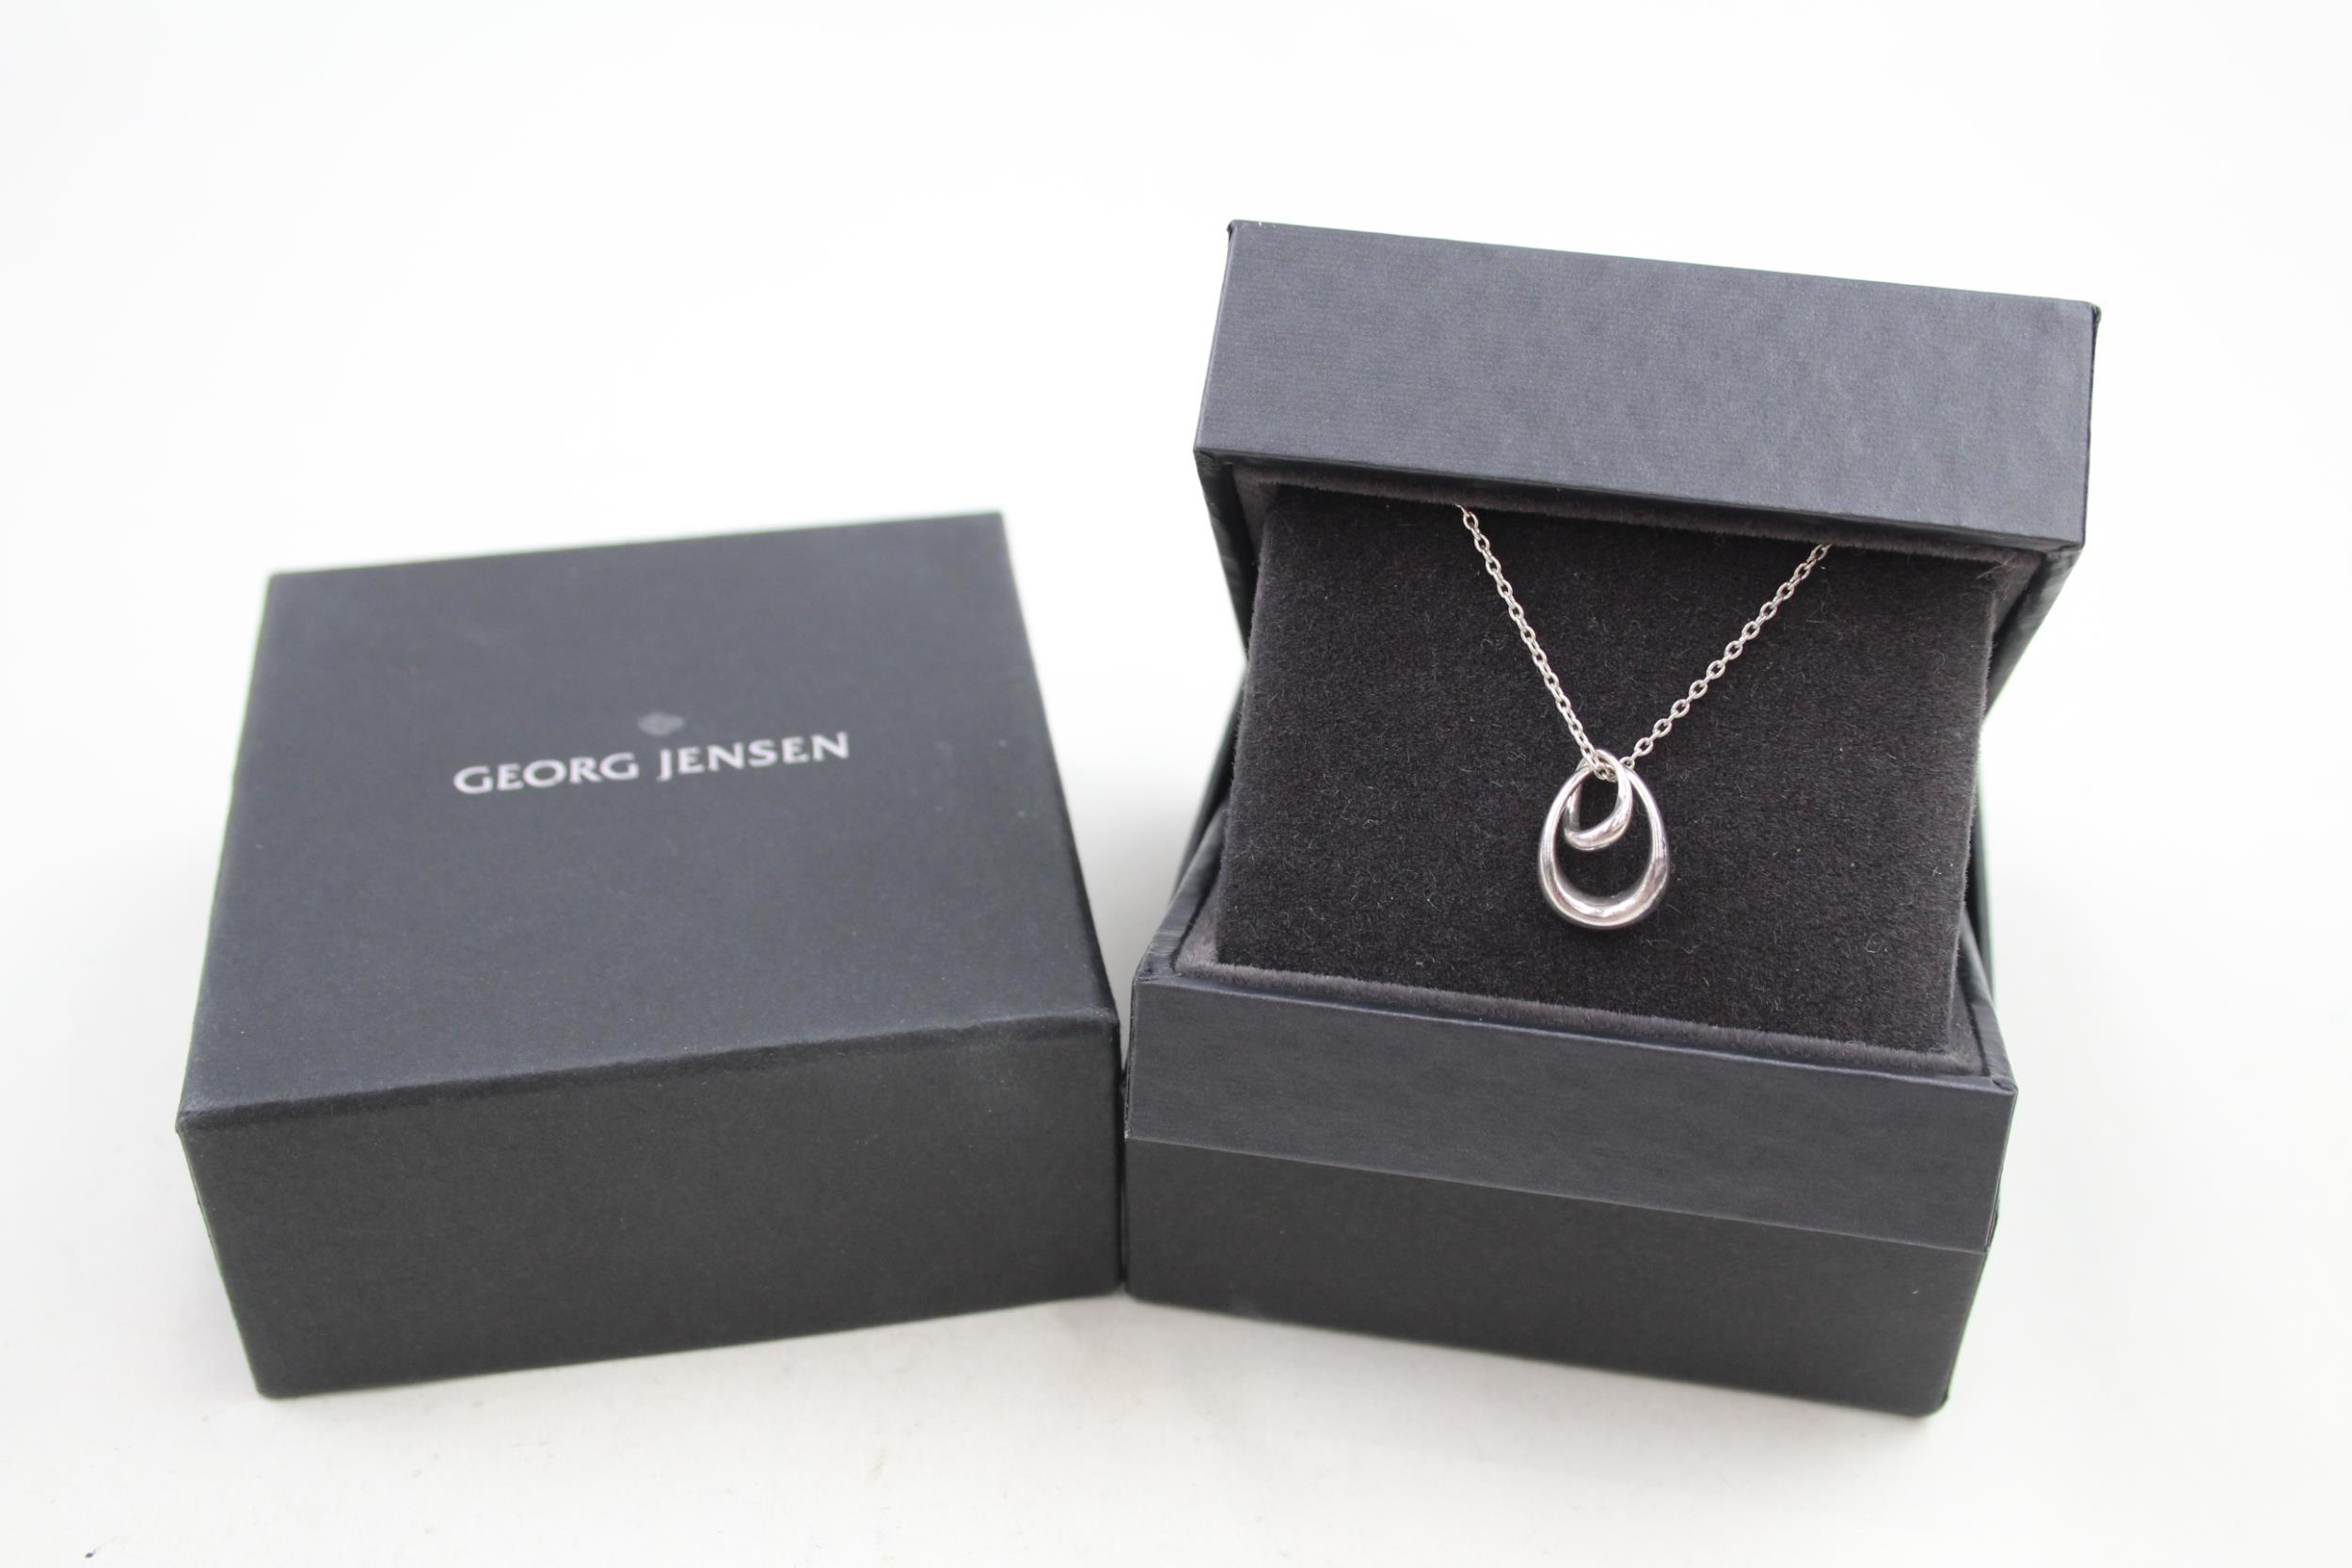 A silver pendant necklace by Georg Jensen (3g)